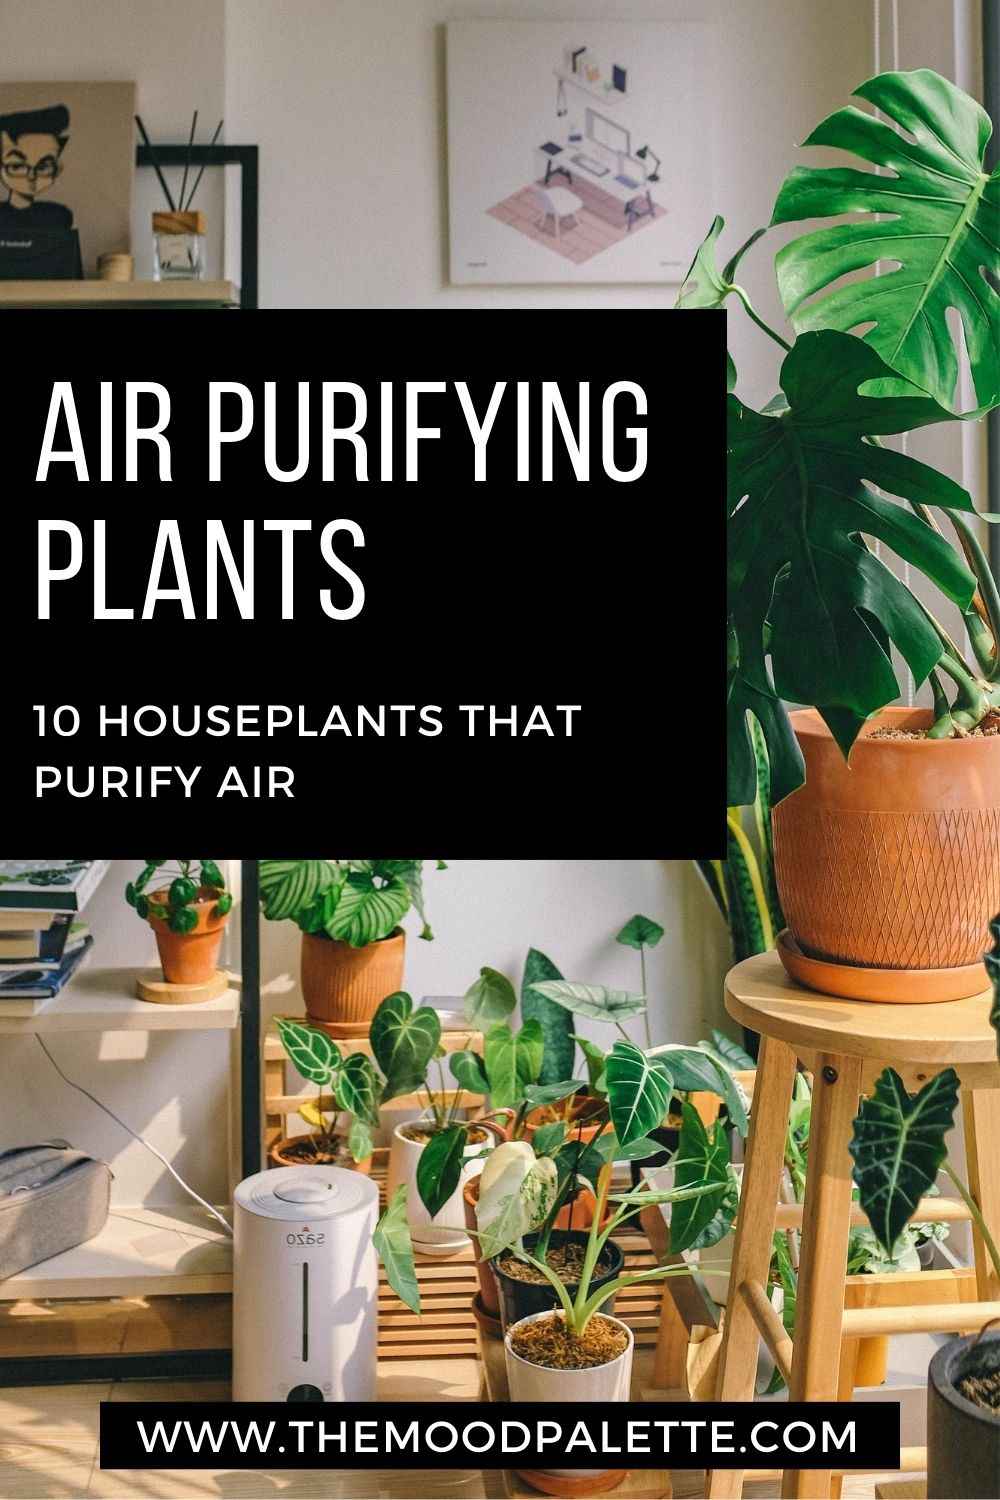 Air Purifying Plants: 10 Houseplants That Purify Air